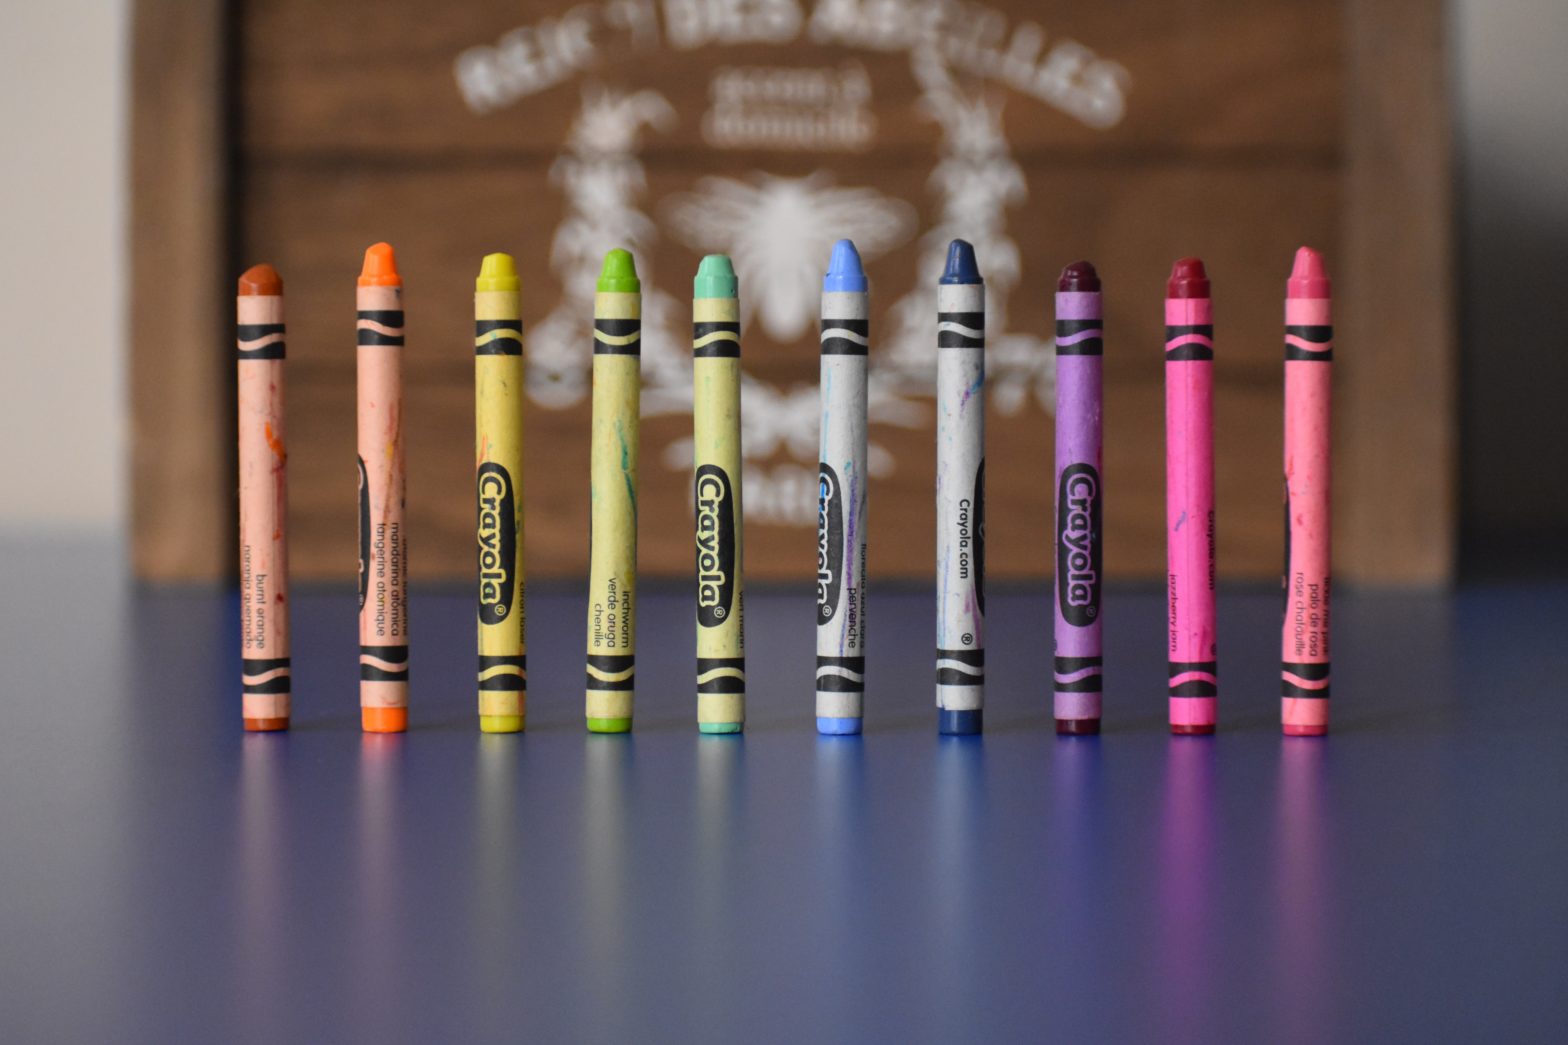 10 kids crayons standing tall